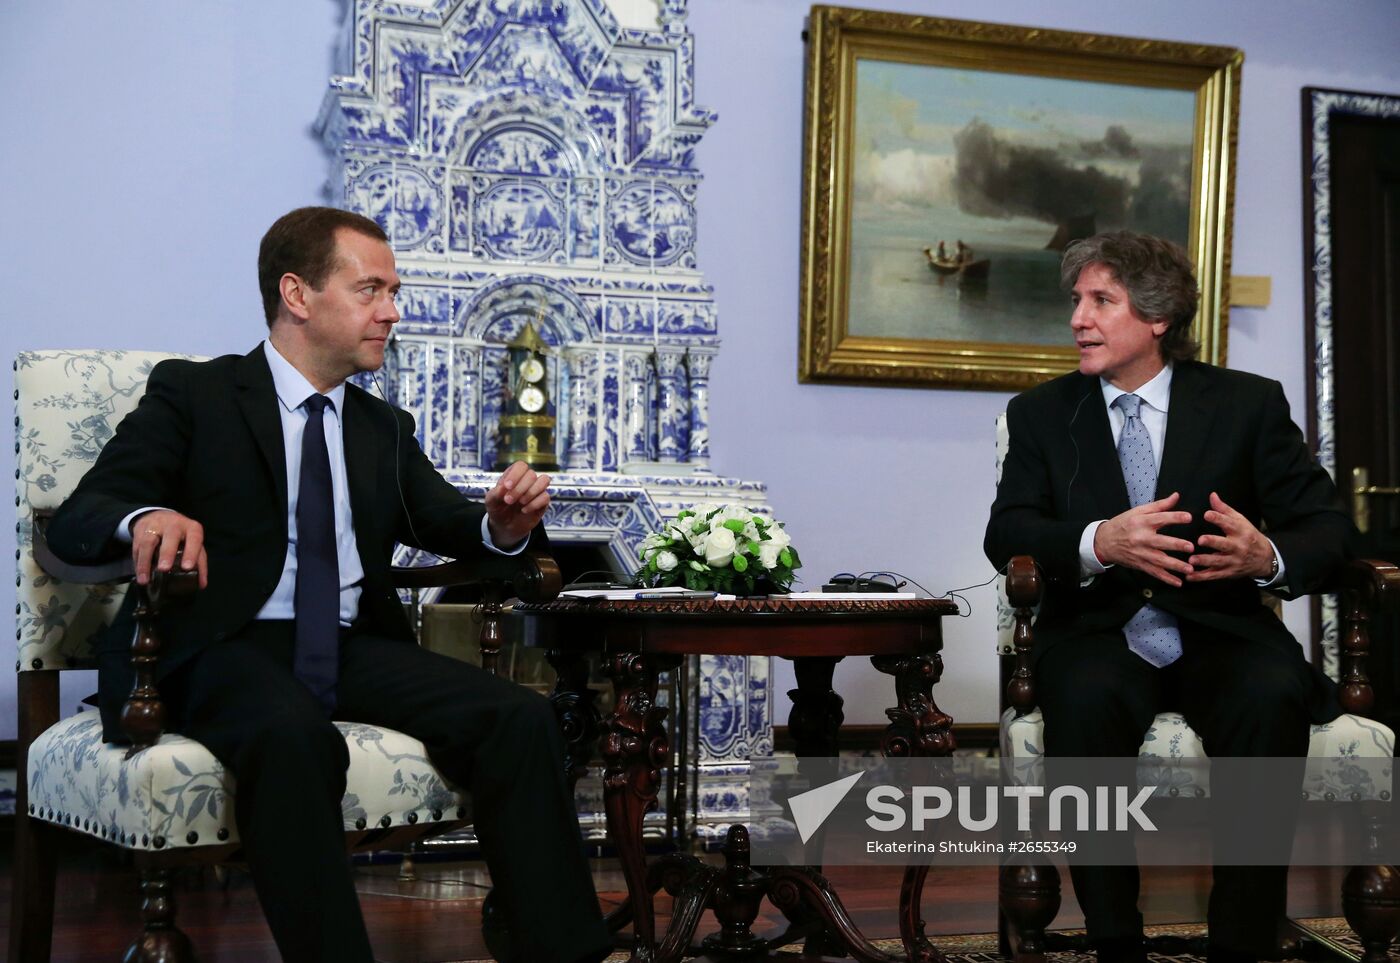 Russian Prime Minister Dmitry Medvedev meets with Argetine Vice-President Amado Boudou